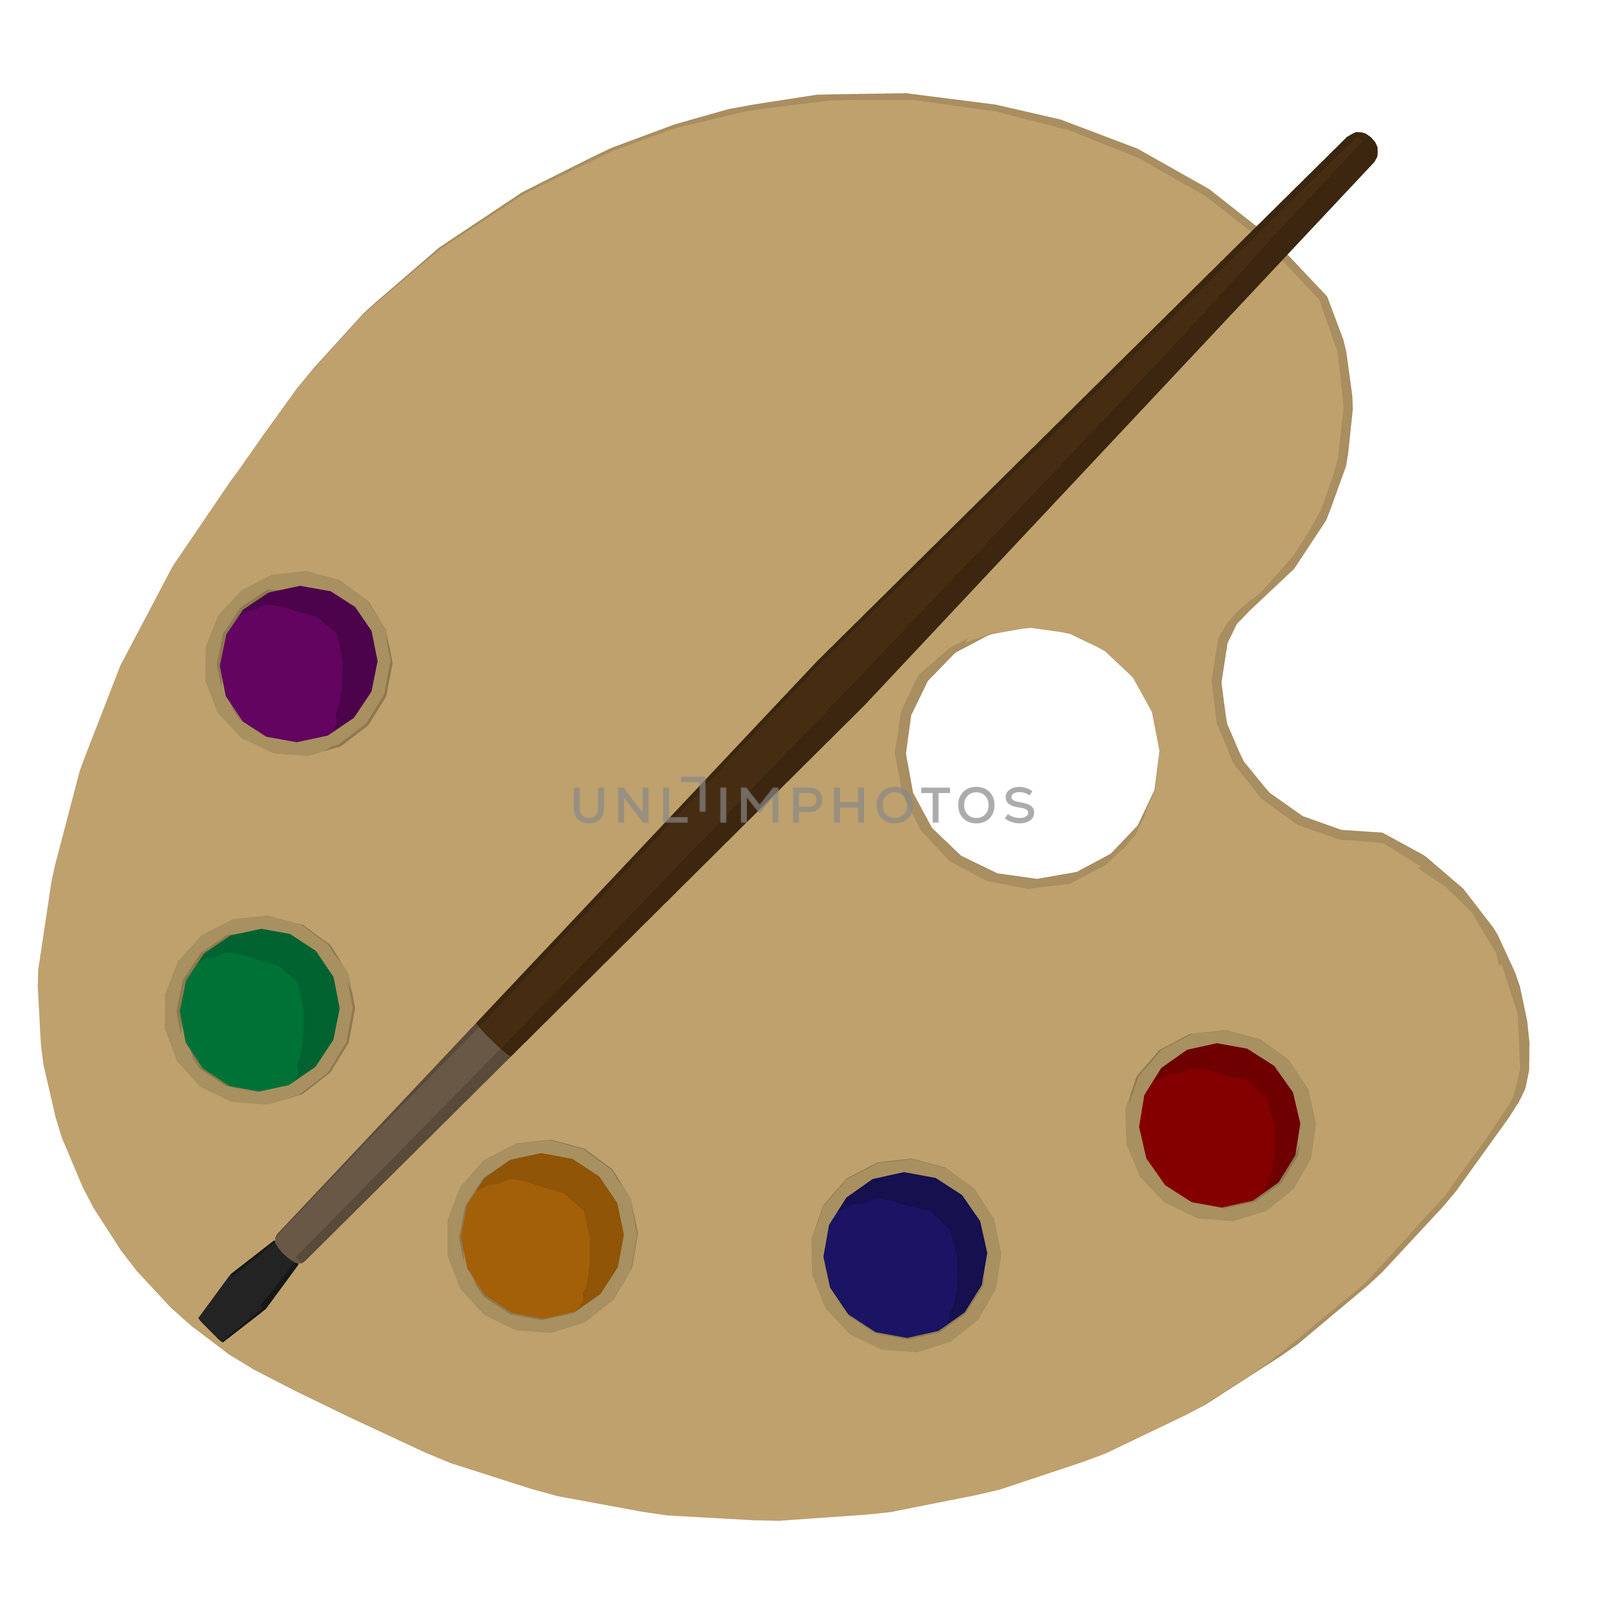 Art Palette with paint brush on a white background